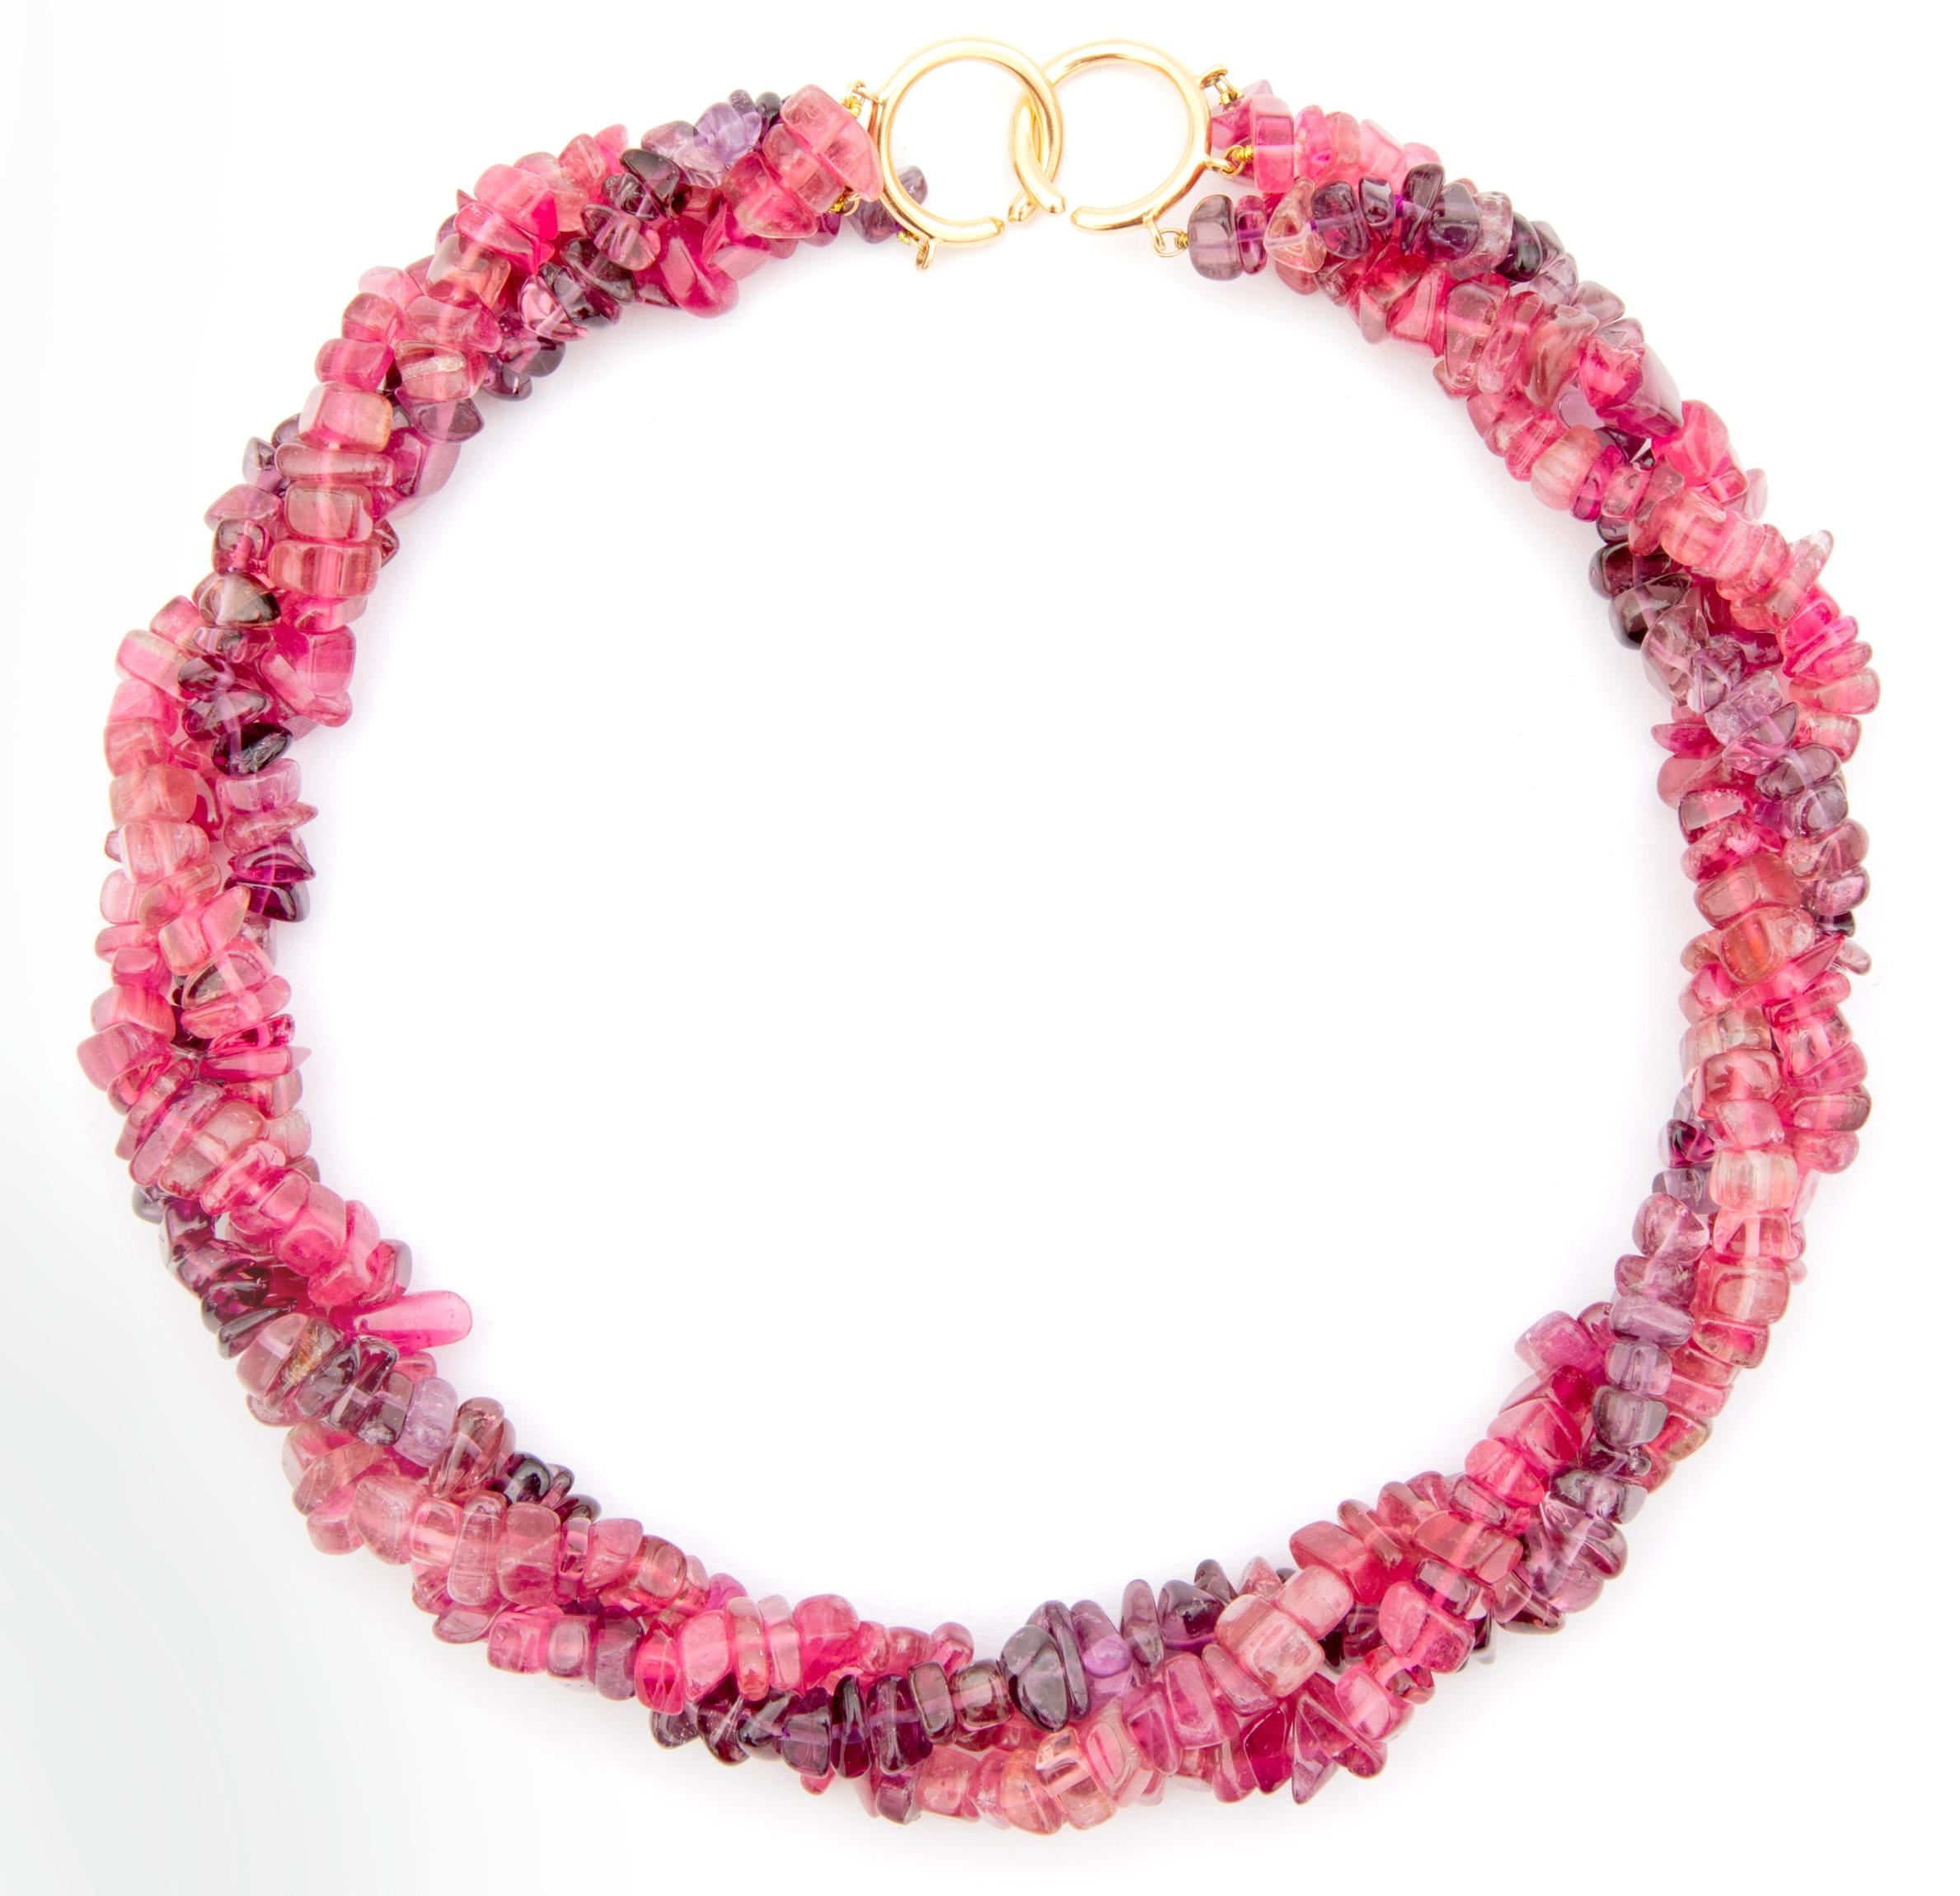 A gorgeous three strand necklace in pink and purple shades of tourmaline, this creation by Paloma Picasso for Tiffany and Co. is truly stunning. It is designed as a series of vary-shape pink and purple tourmaline beads and can be worn straight or